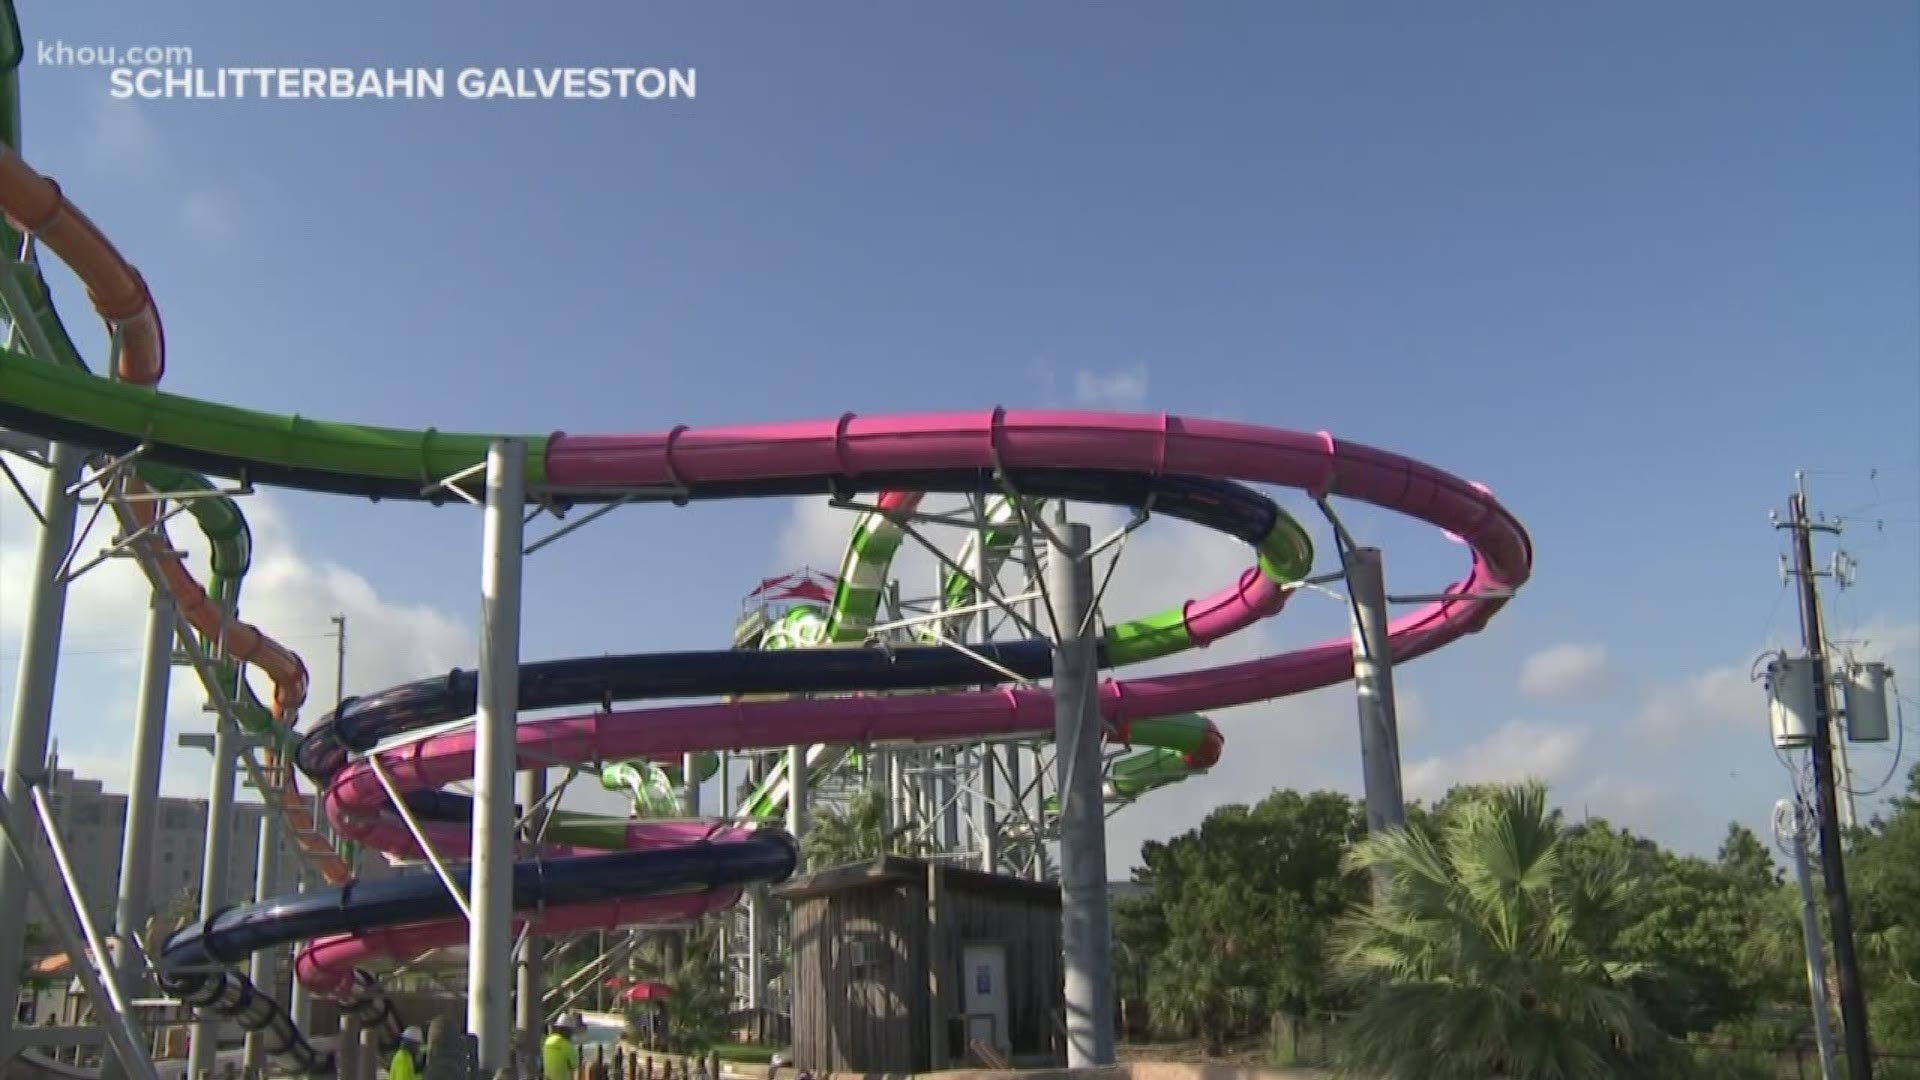 Schlitterbahn Galveston has a new ride. The water park opened Infinity Racers -- a space-themed, head-first slide.